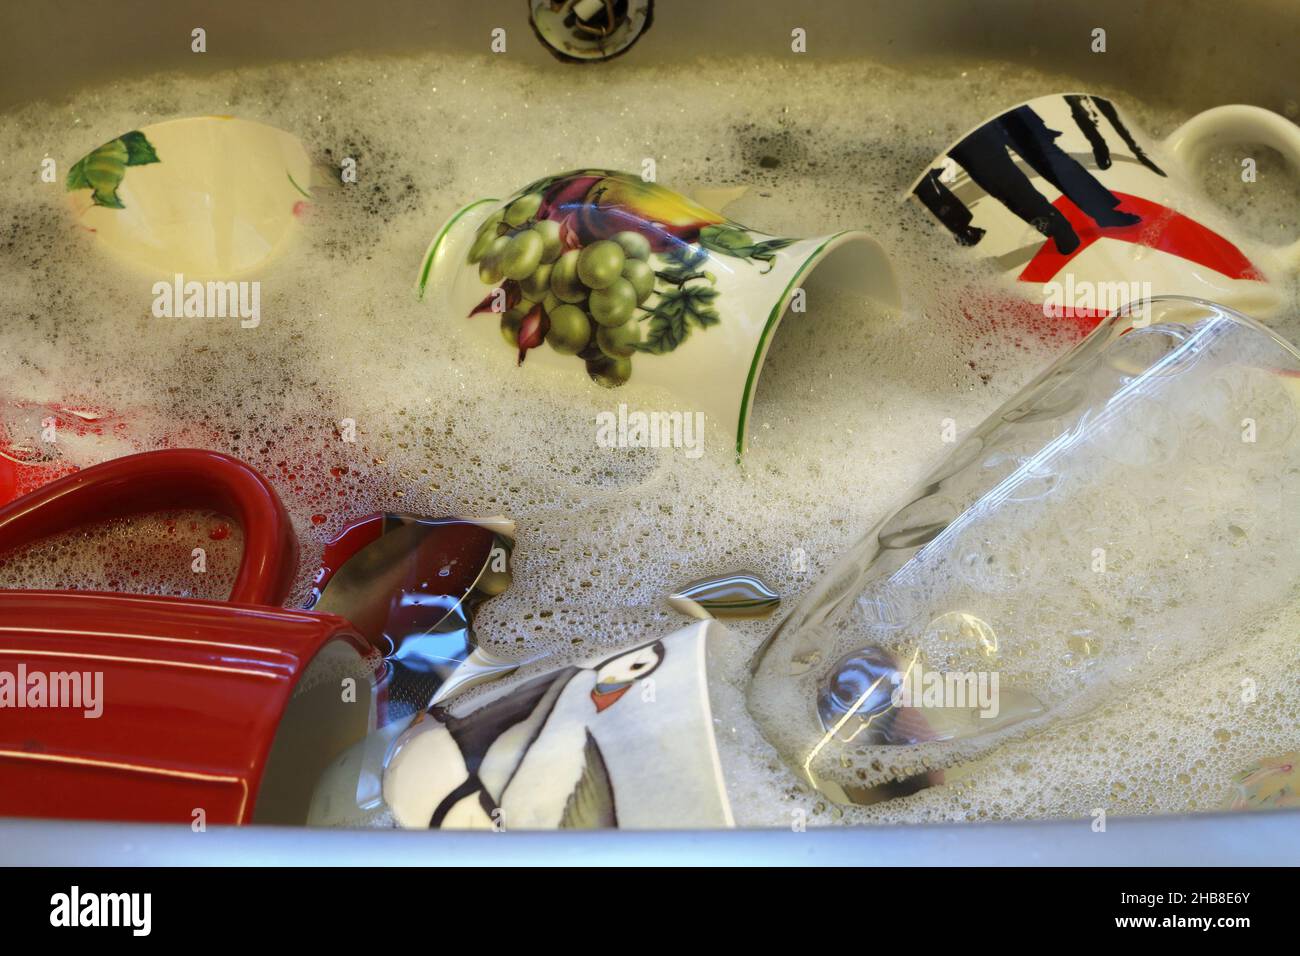 Drinking cups and glass in sink with soap suds Stock Photo